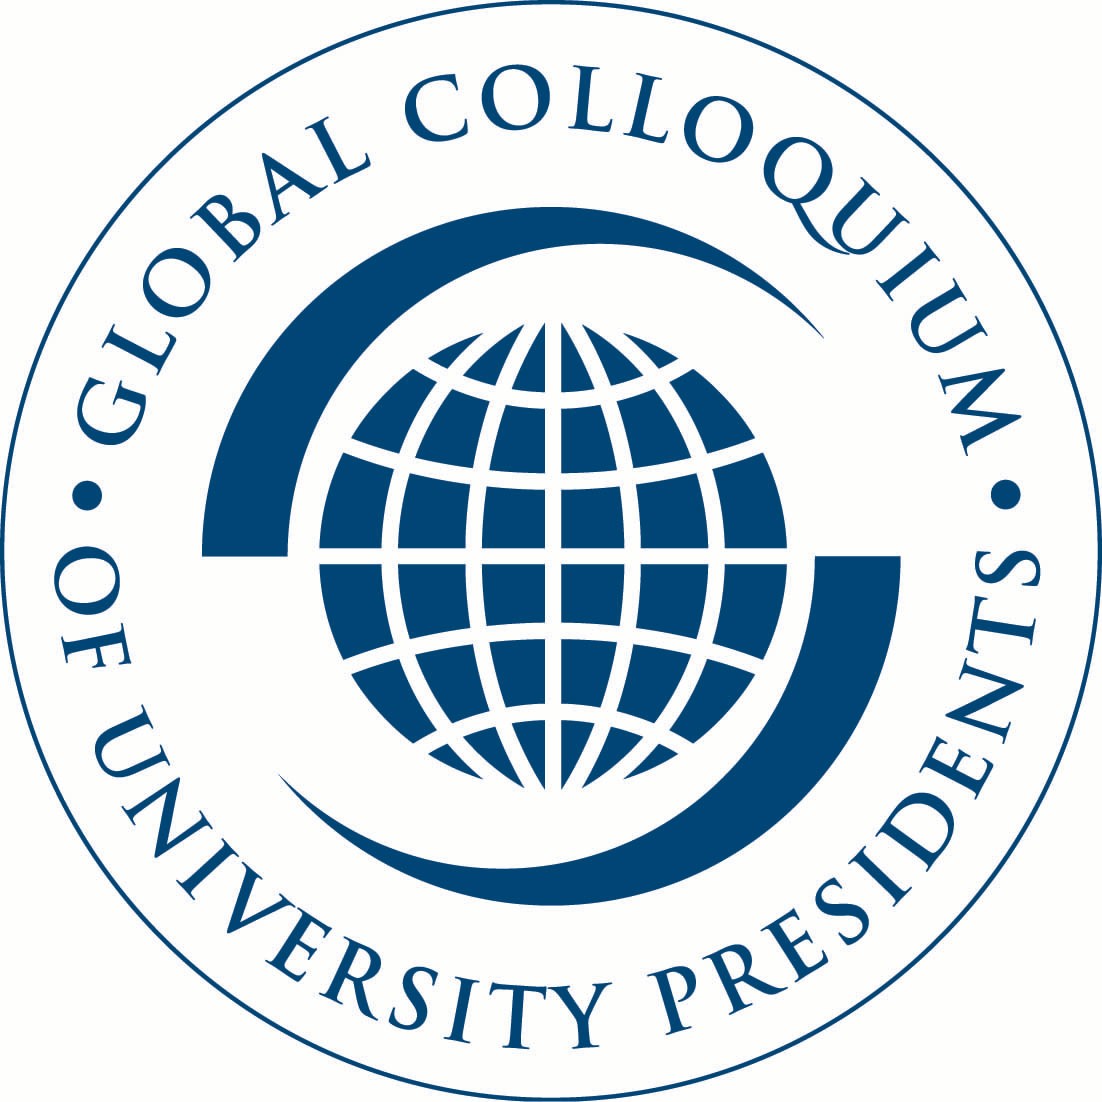 ACADEMIC FREEDOM STATEMENT OF THE FIRST GLOBAL COLLOQUIUM OF